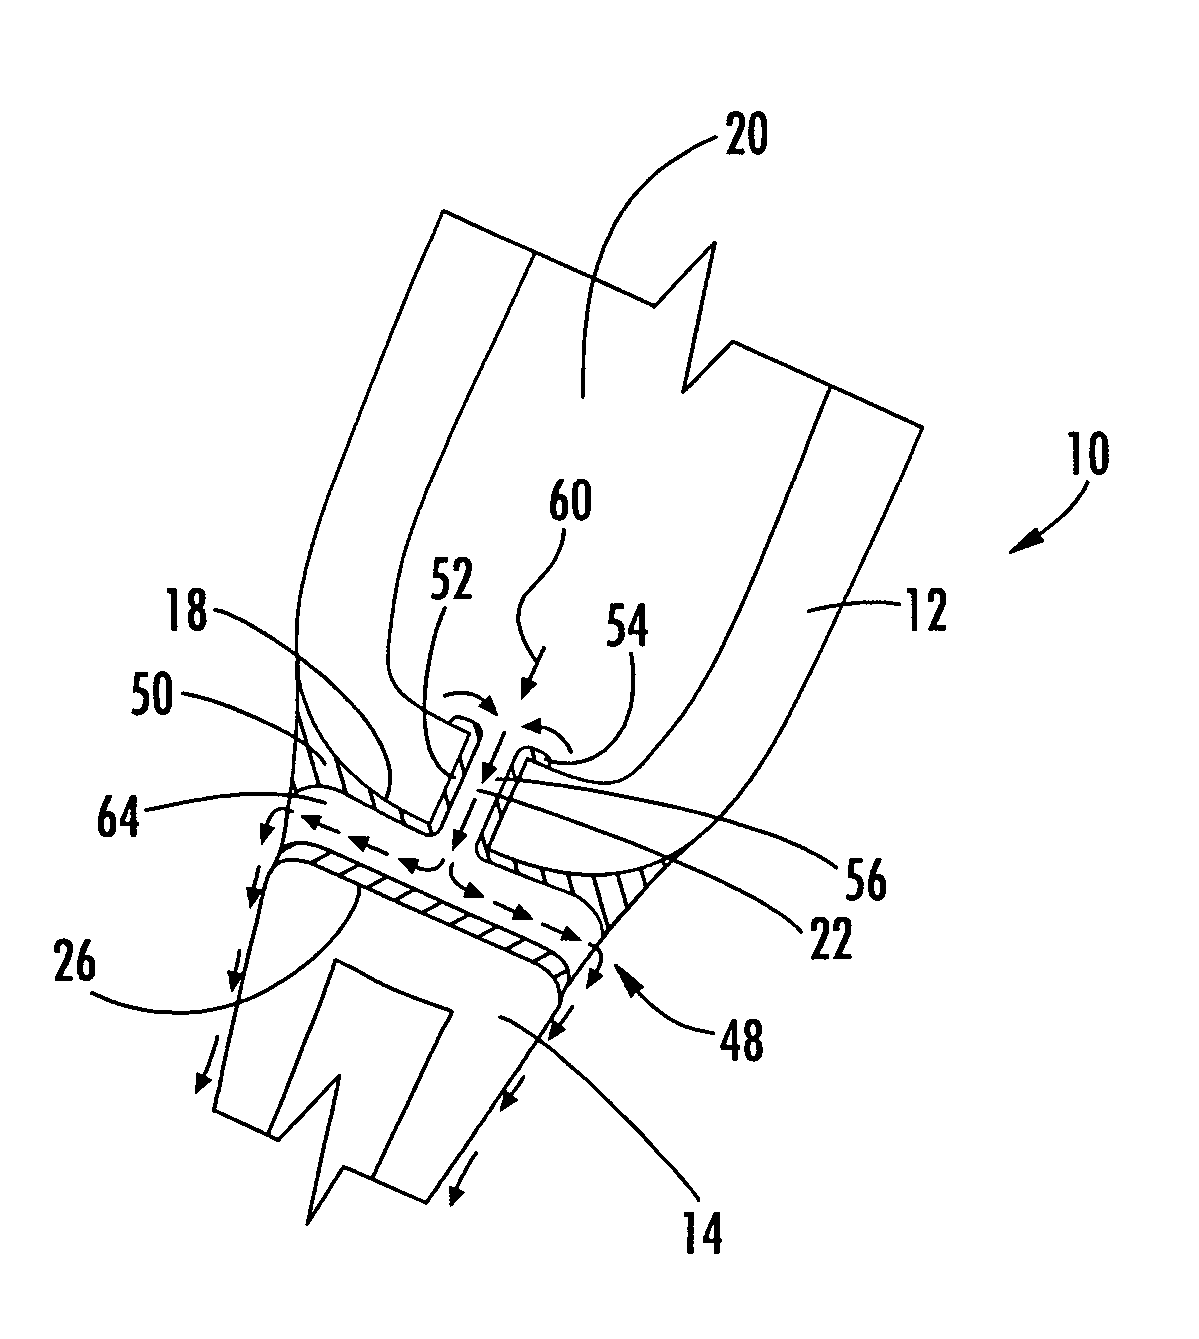 Vane assembly with metal trailing edge segment